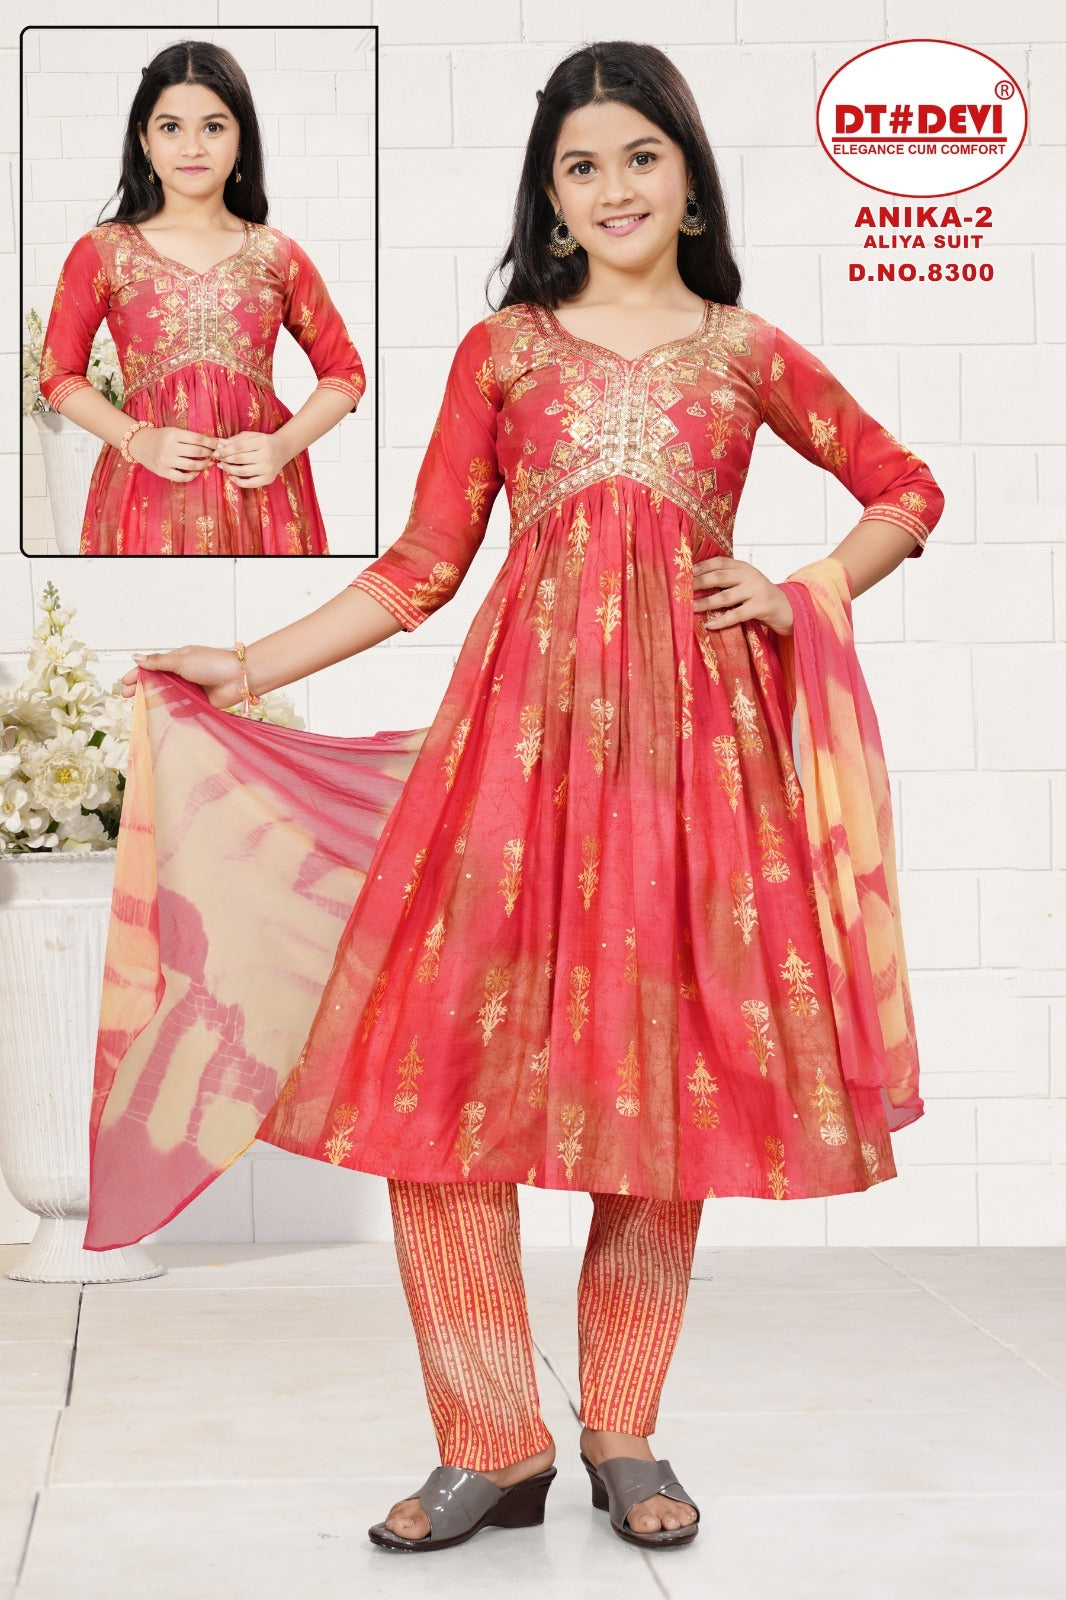 Anika-2 8300 Dt Devi Modal Girls Readymade Pant Suits